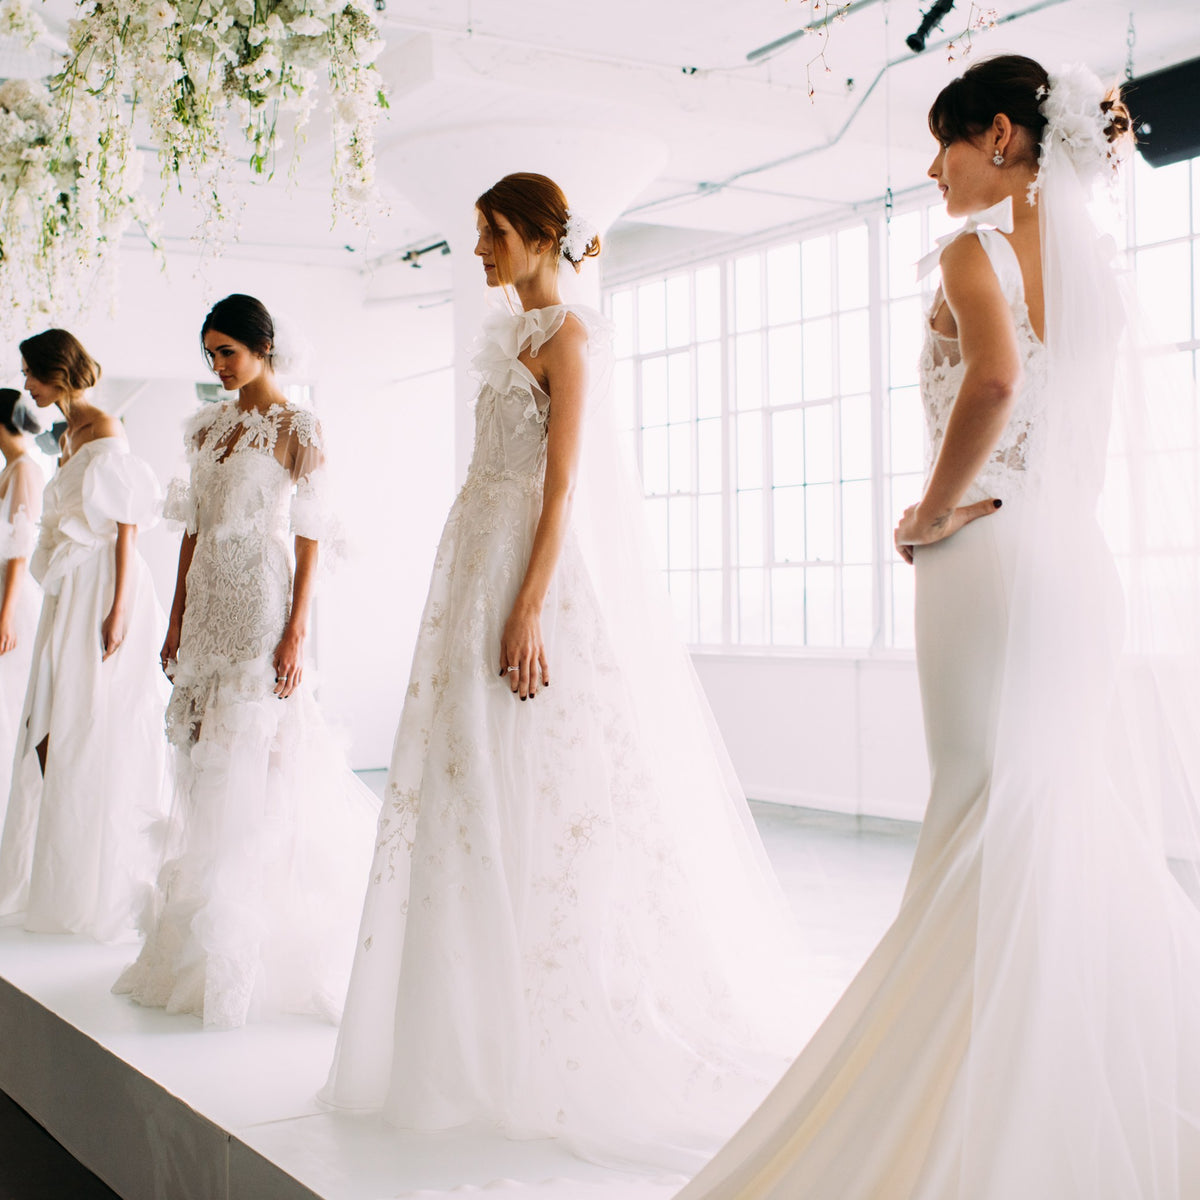 How to choose the wedding dress for each body type: main tips